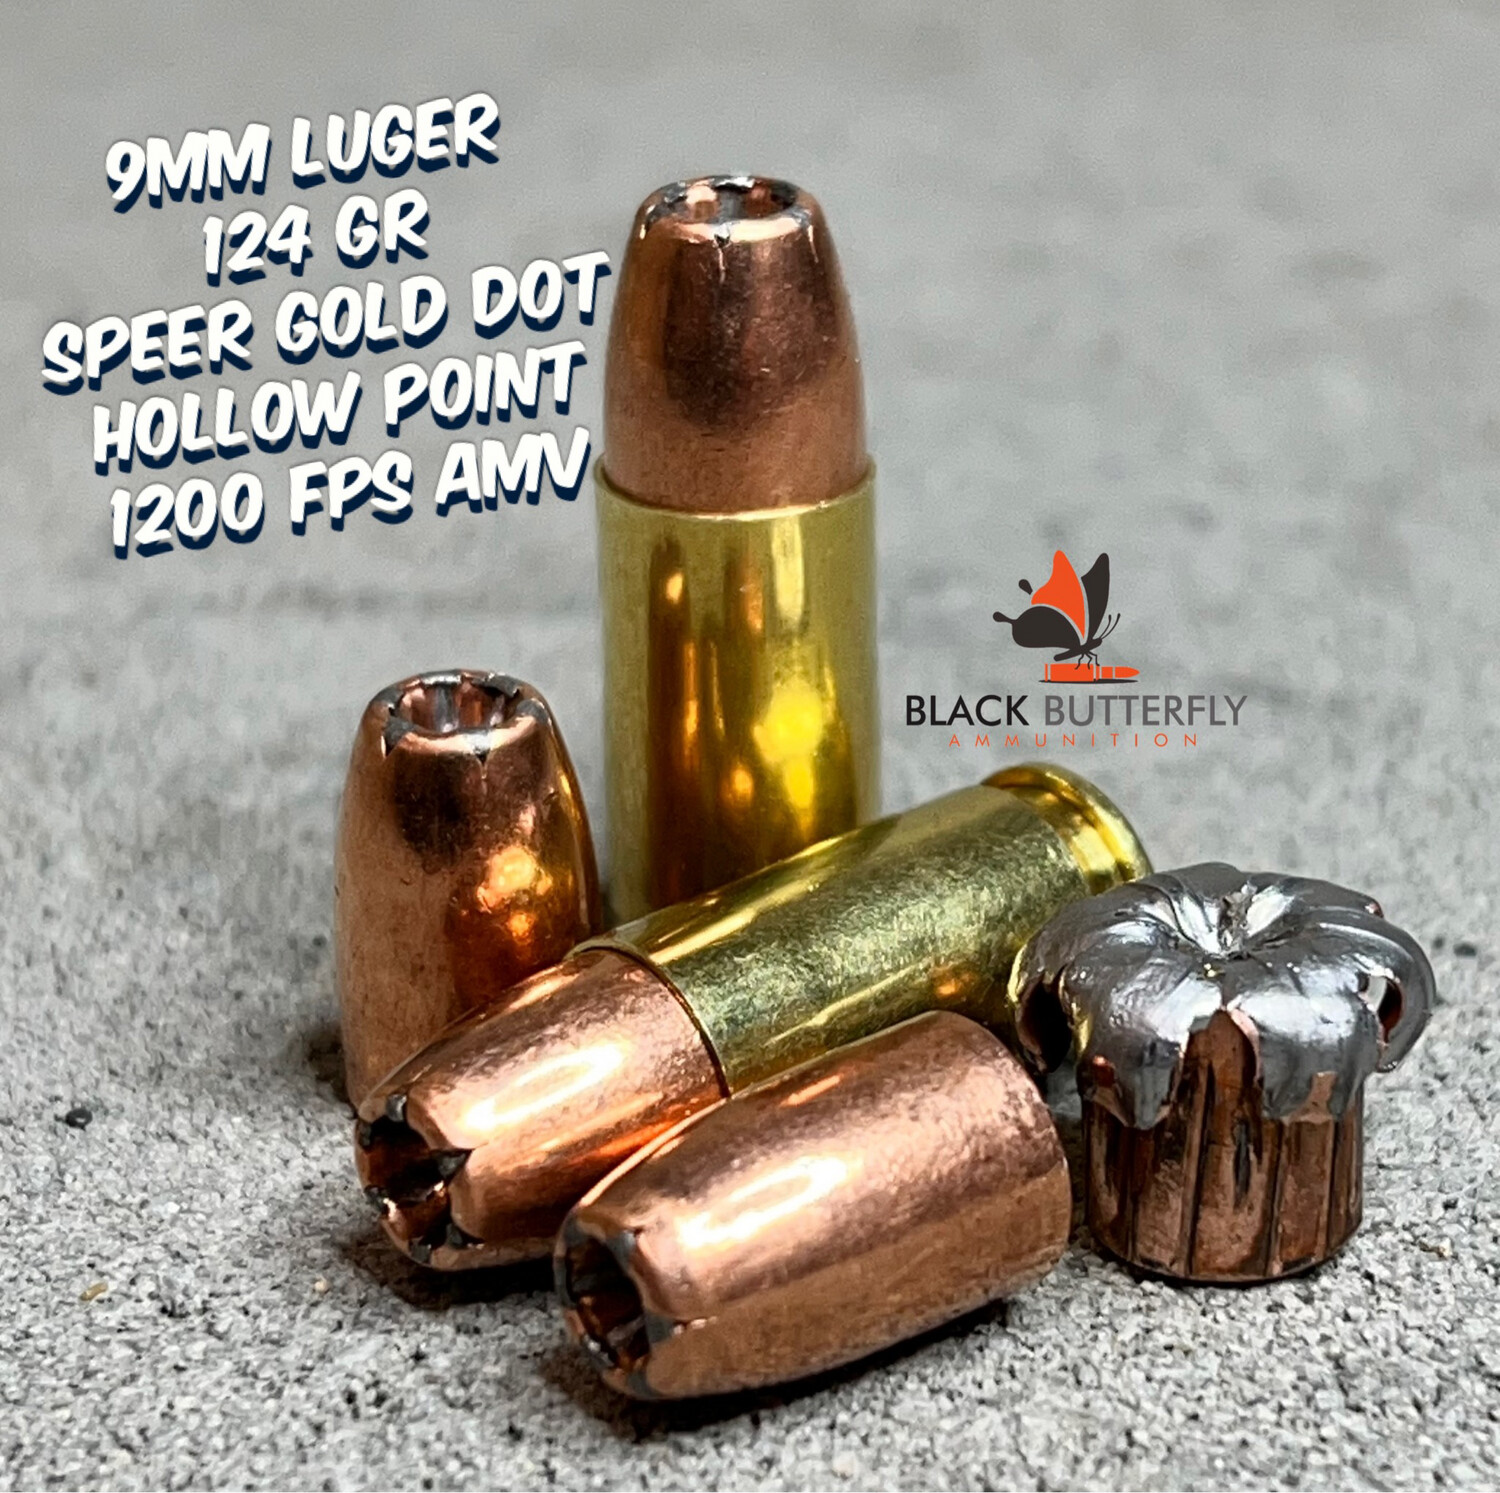 Black Butterfly Ammunition, Premium Self Defense and Hunting Ammo, 9mm Luger, 124 gr, 100 Rounds, Speer Gold Dot (1200 FPS AMV)